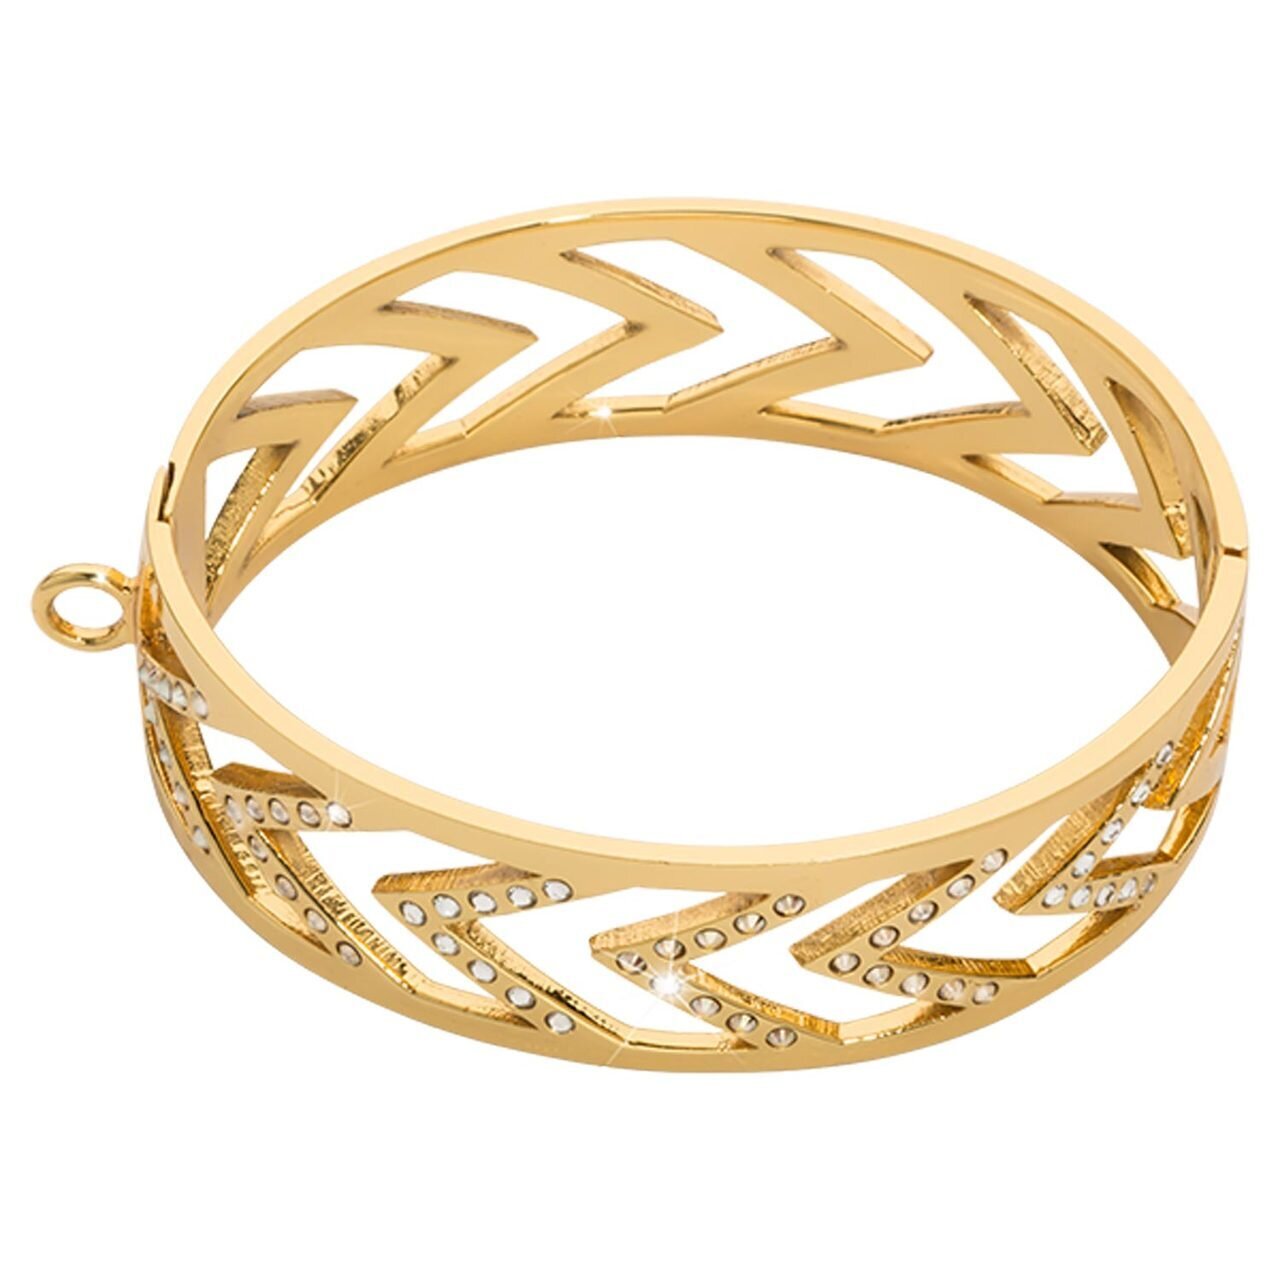 Nikki Lissoni Large Geometric Chevron Bangle of 2cm with One Loop To Attach A Charm Gold-plated 17cm B1140G17